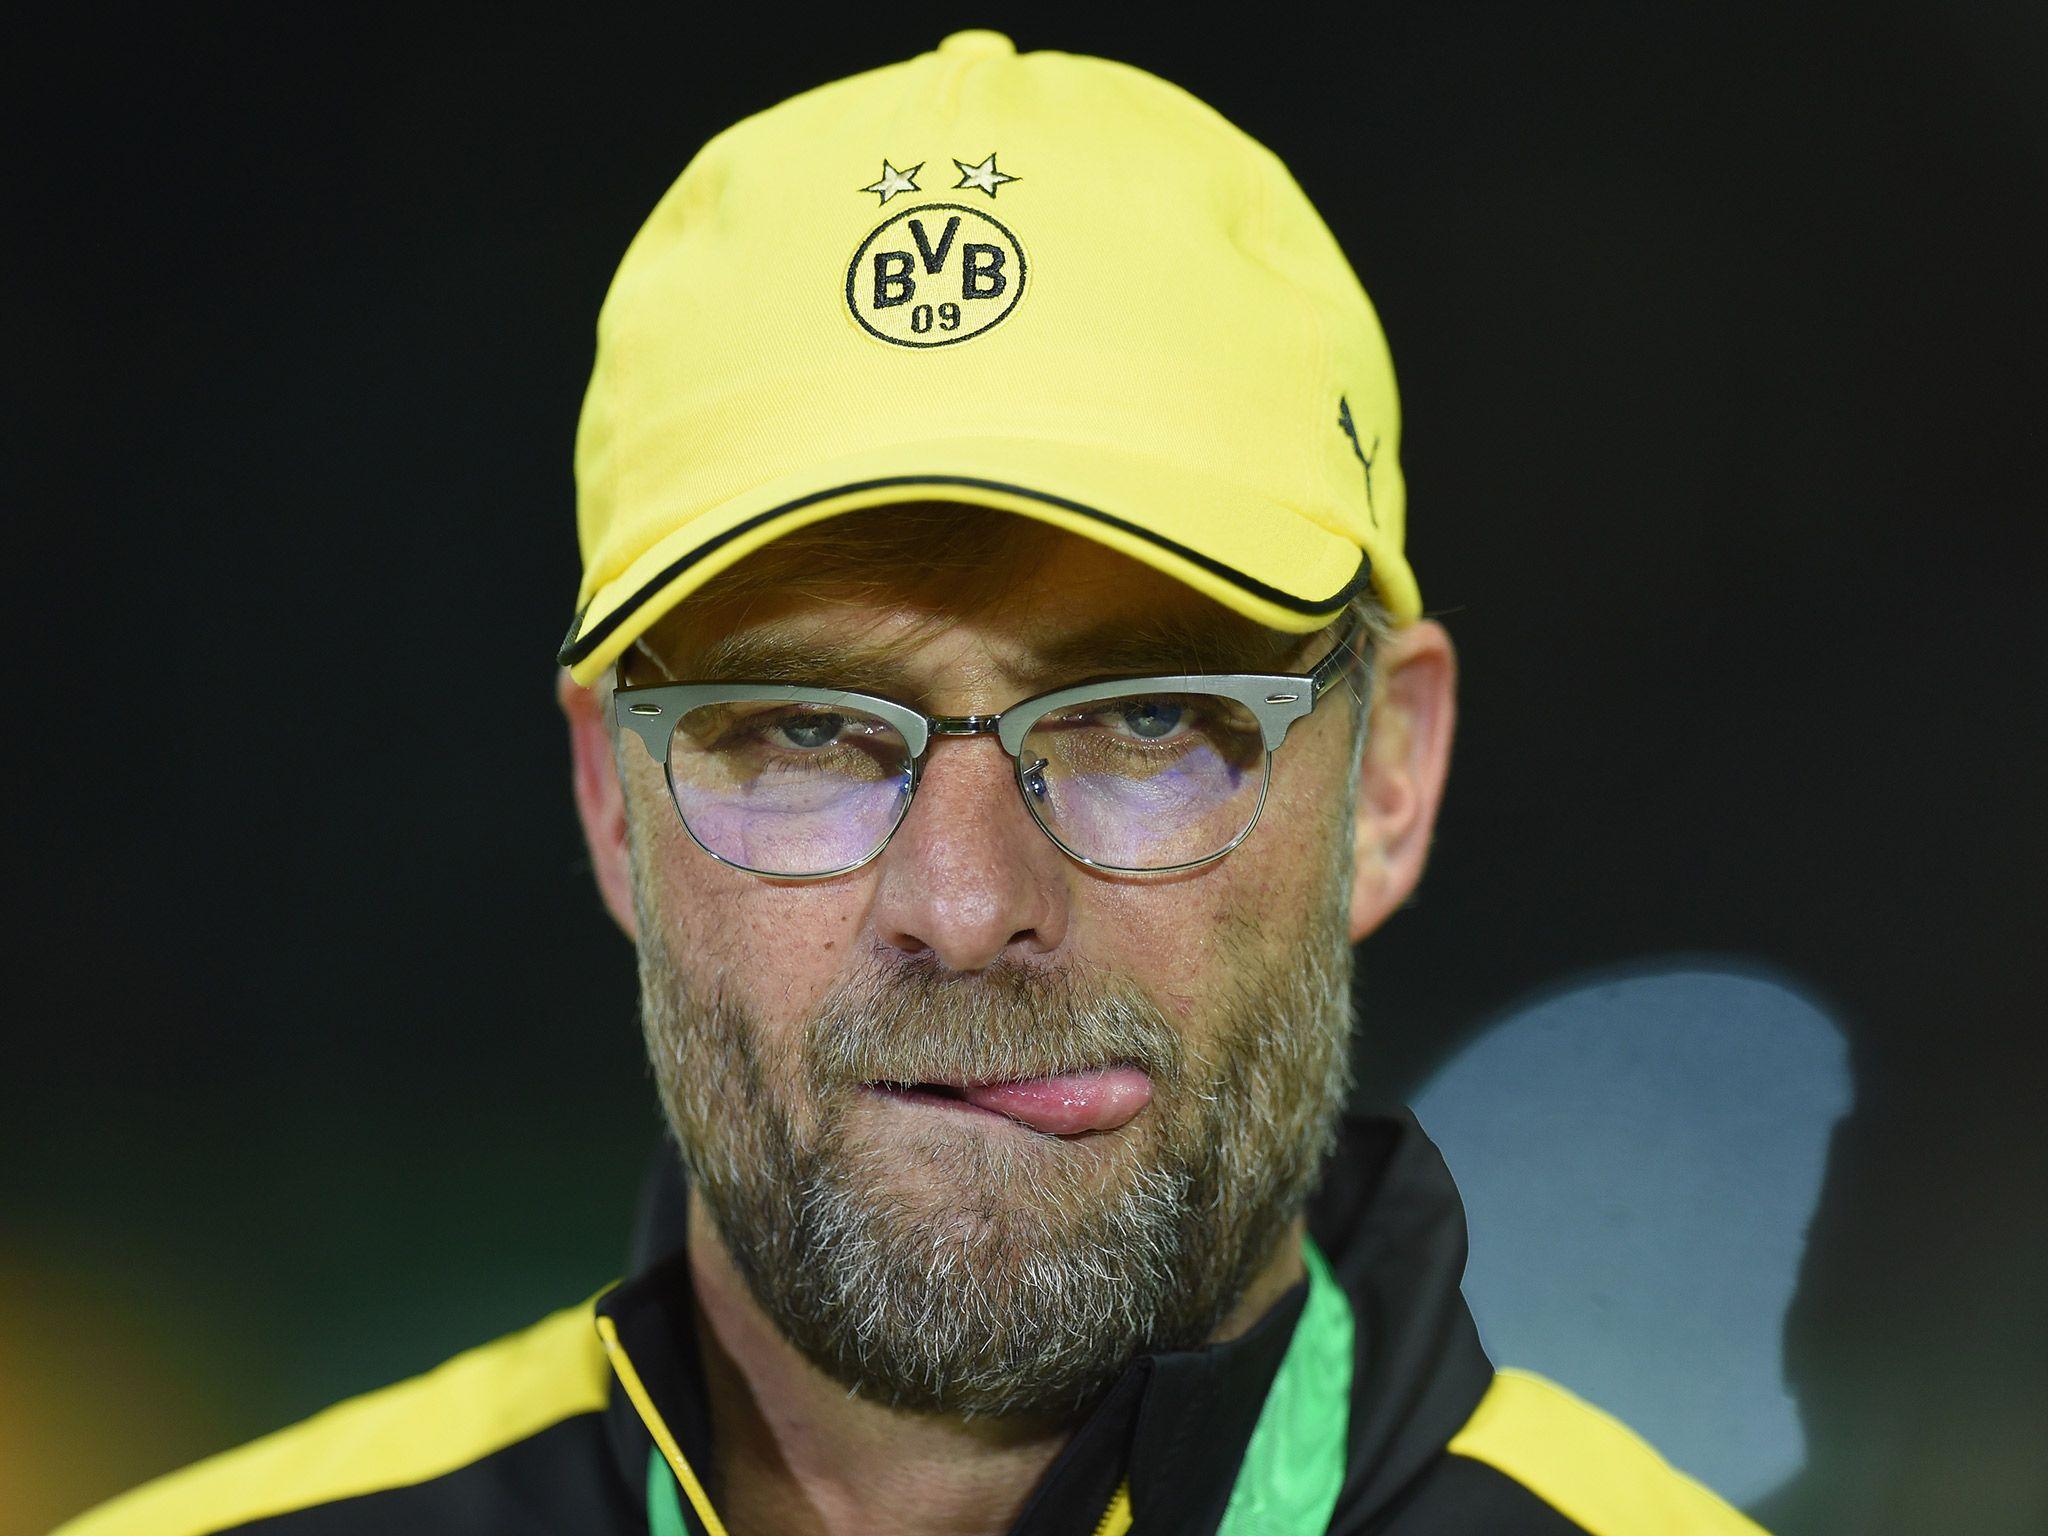 Jurgen Klopp to Liverpool latest: Incoming Reds manager 'confident